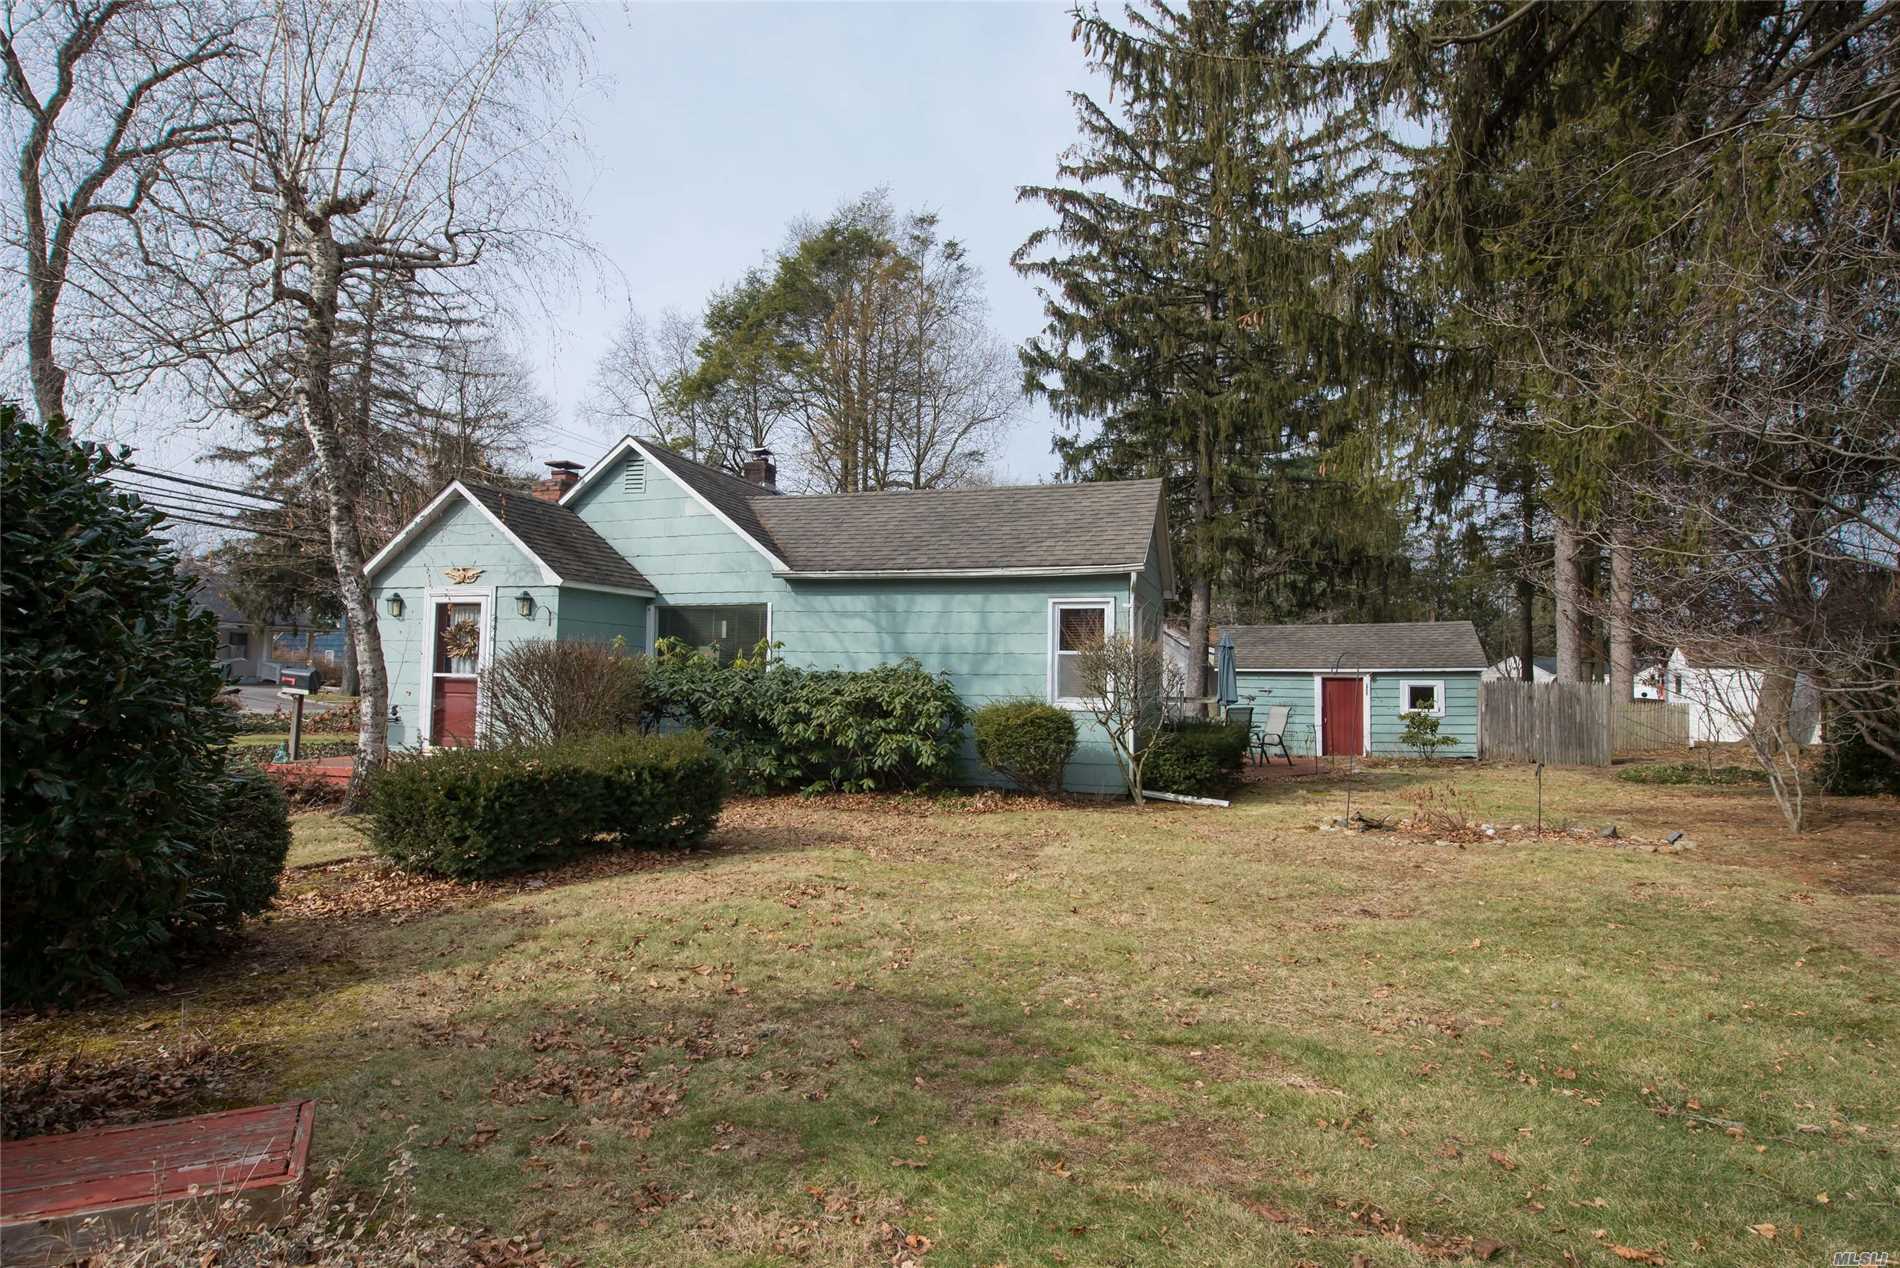 Absolutely Adorable 2 Bedroom Ranch Need Some Tlc Located In Sd 13 Great For 1st Time Homebuyers Why Rent When You Can Own Or Downsizers !! This Ranch Has Charm And Personality Great Property With Gardens Throughout. Low Taxes !! This Is Such A Great Home !!